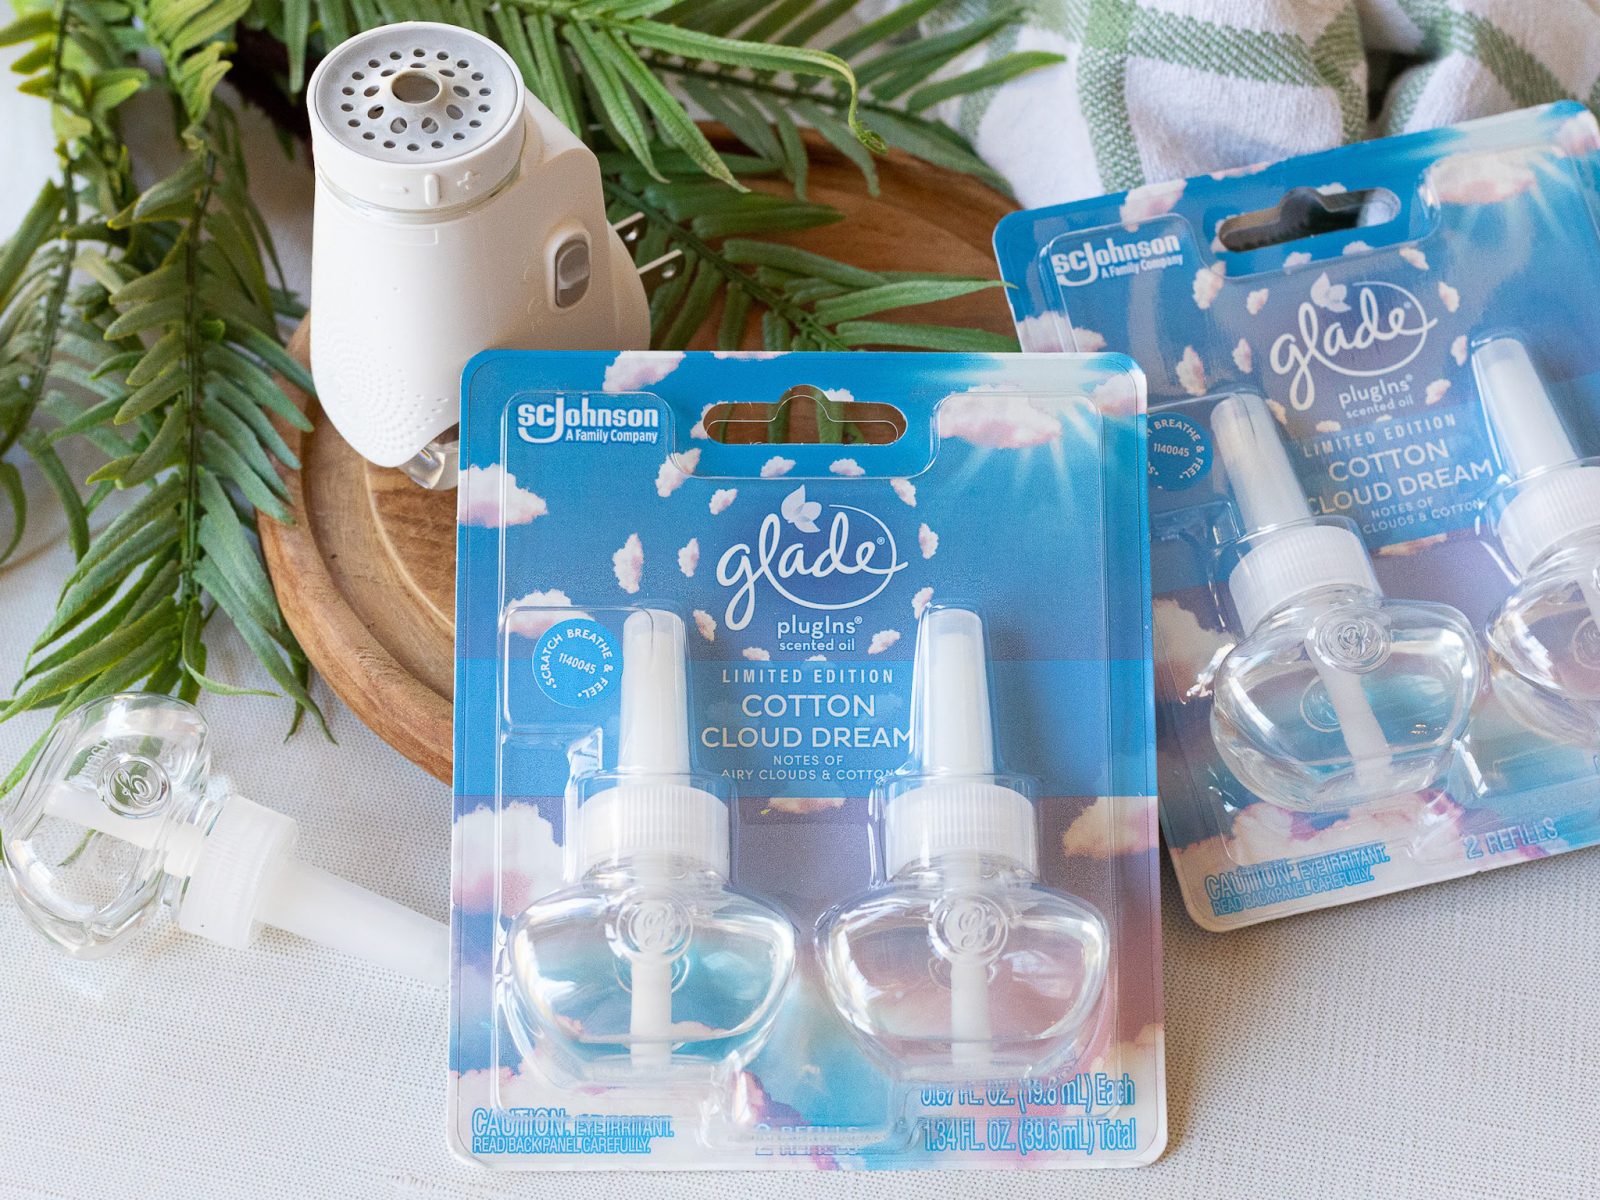 Elevate the Energy of Any Room with Glade® Limited Edition Collection Fragrances